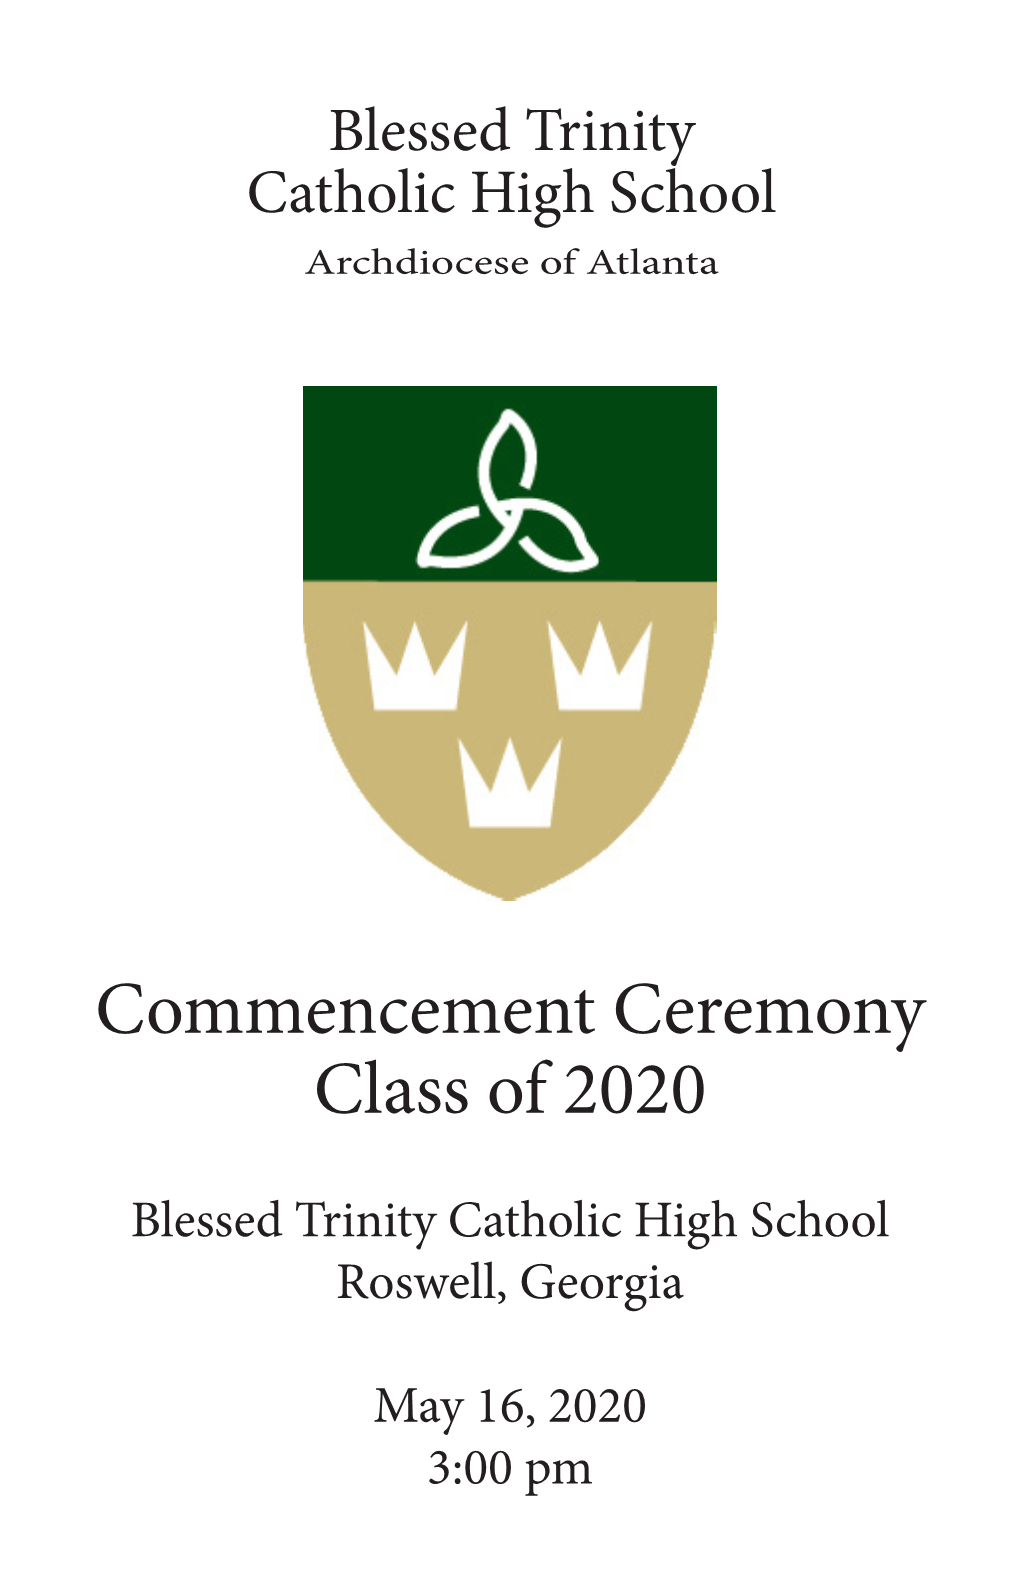 Commencement Ceremony Class of 2020